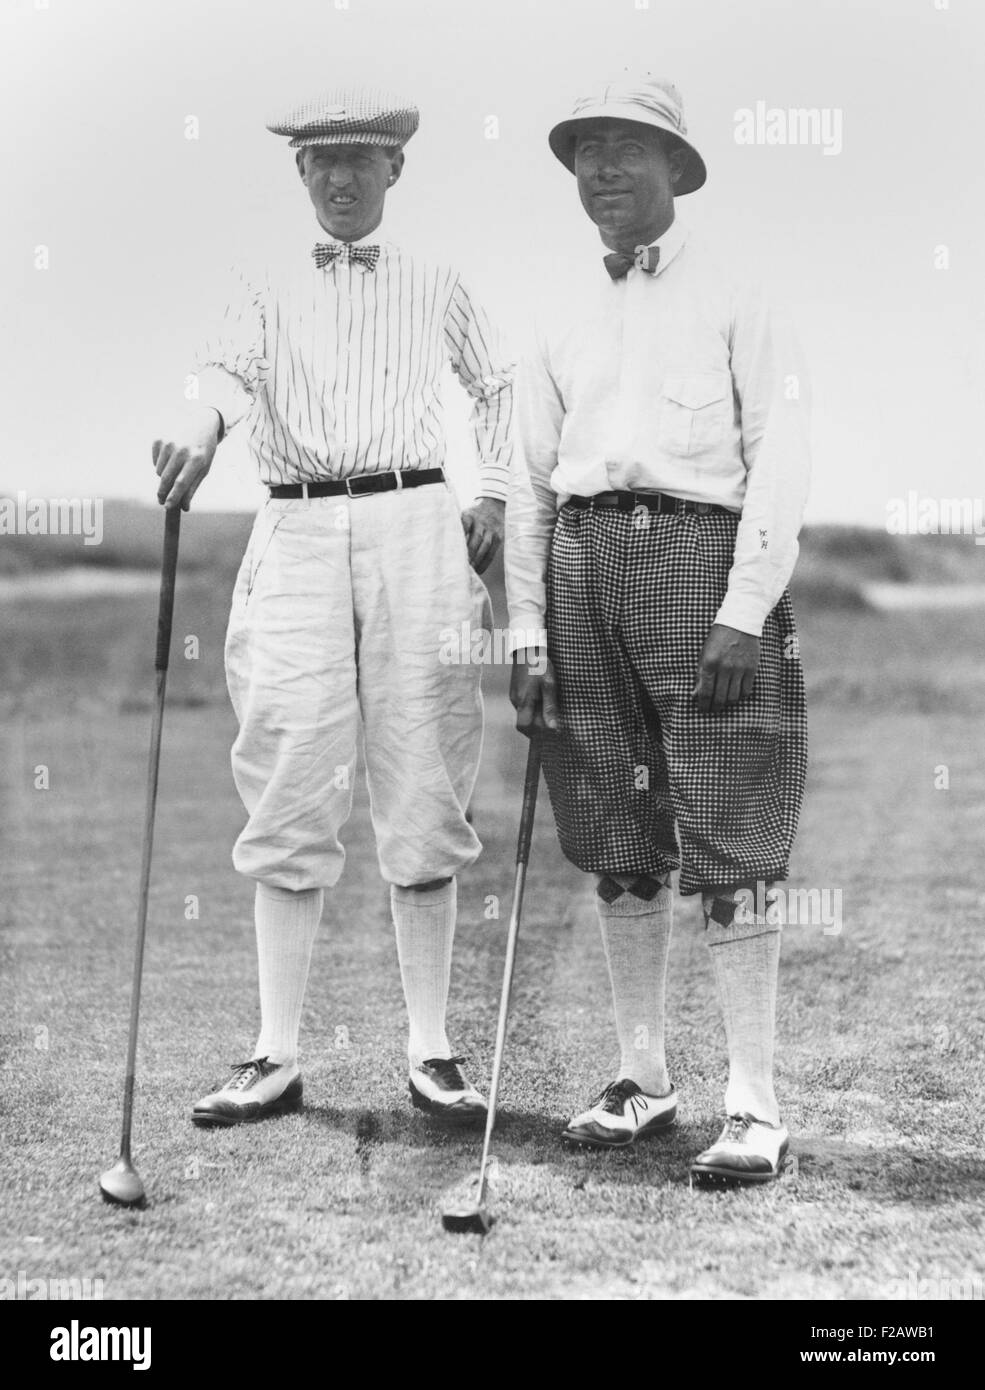 Golfers McDonald Smith and Walter Hagan, at Inwood, Long Island, on July 11, 1923. Hagan wore a tropical pith helmet to cope with the heat. (CSU 2015 11 1443) Stock Photo